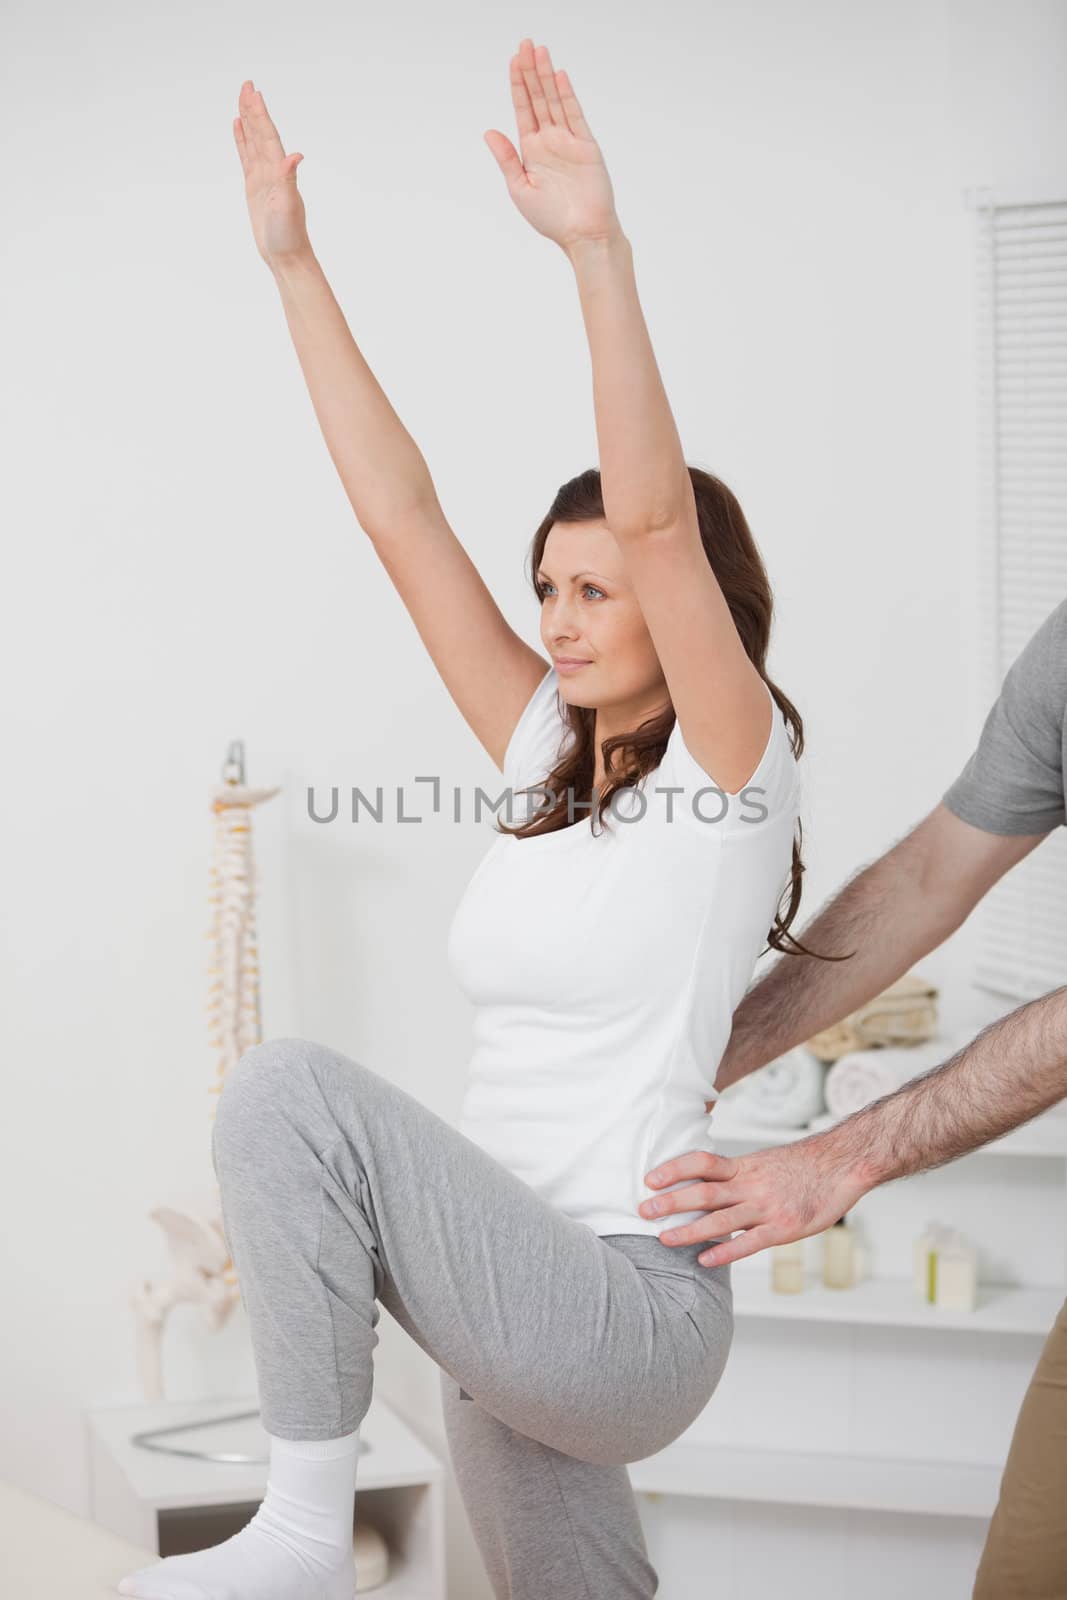 Woman doing exercise while a man is putting his hands on her hips in a room